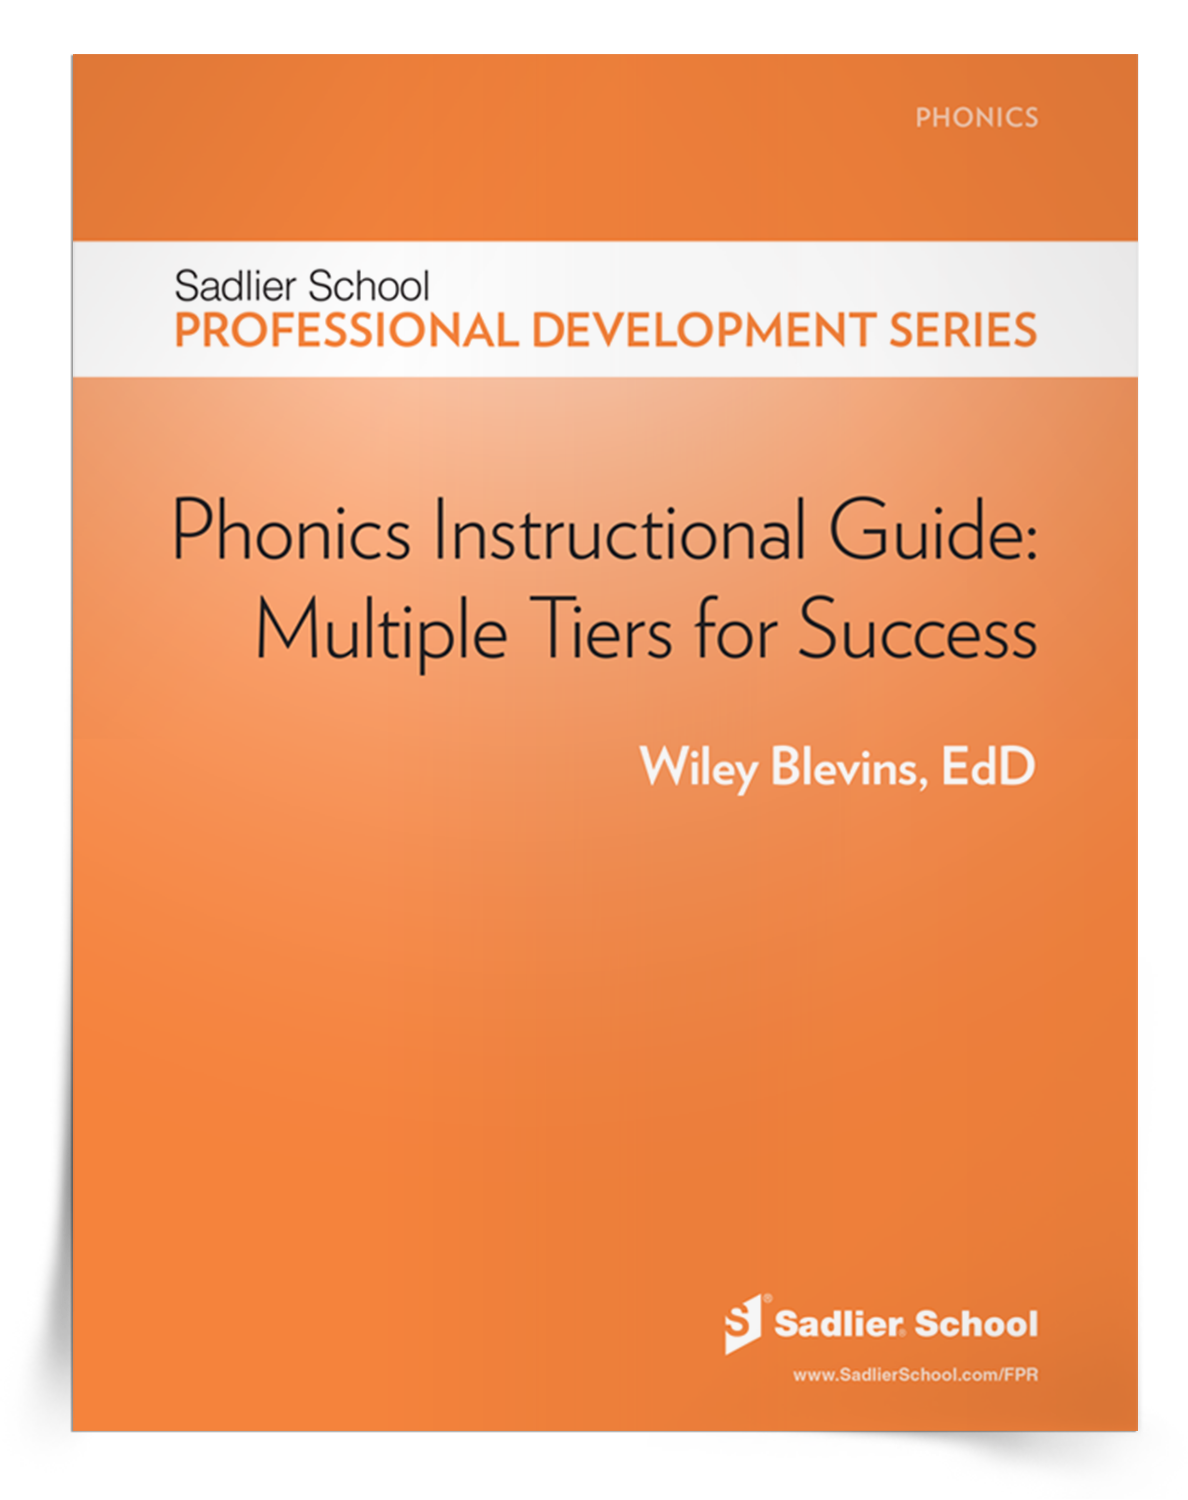 phonics-instructional-guide-multiple-tiers-for-success-download